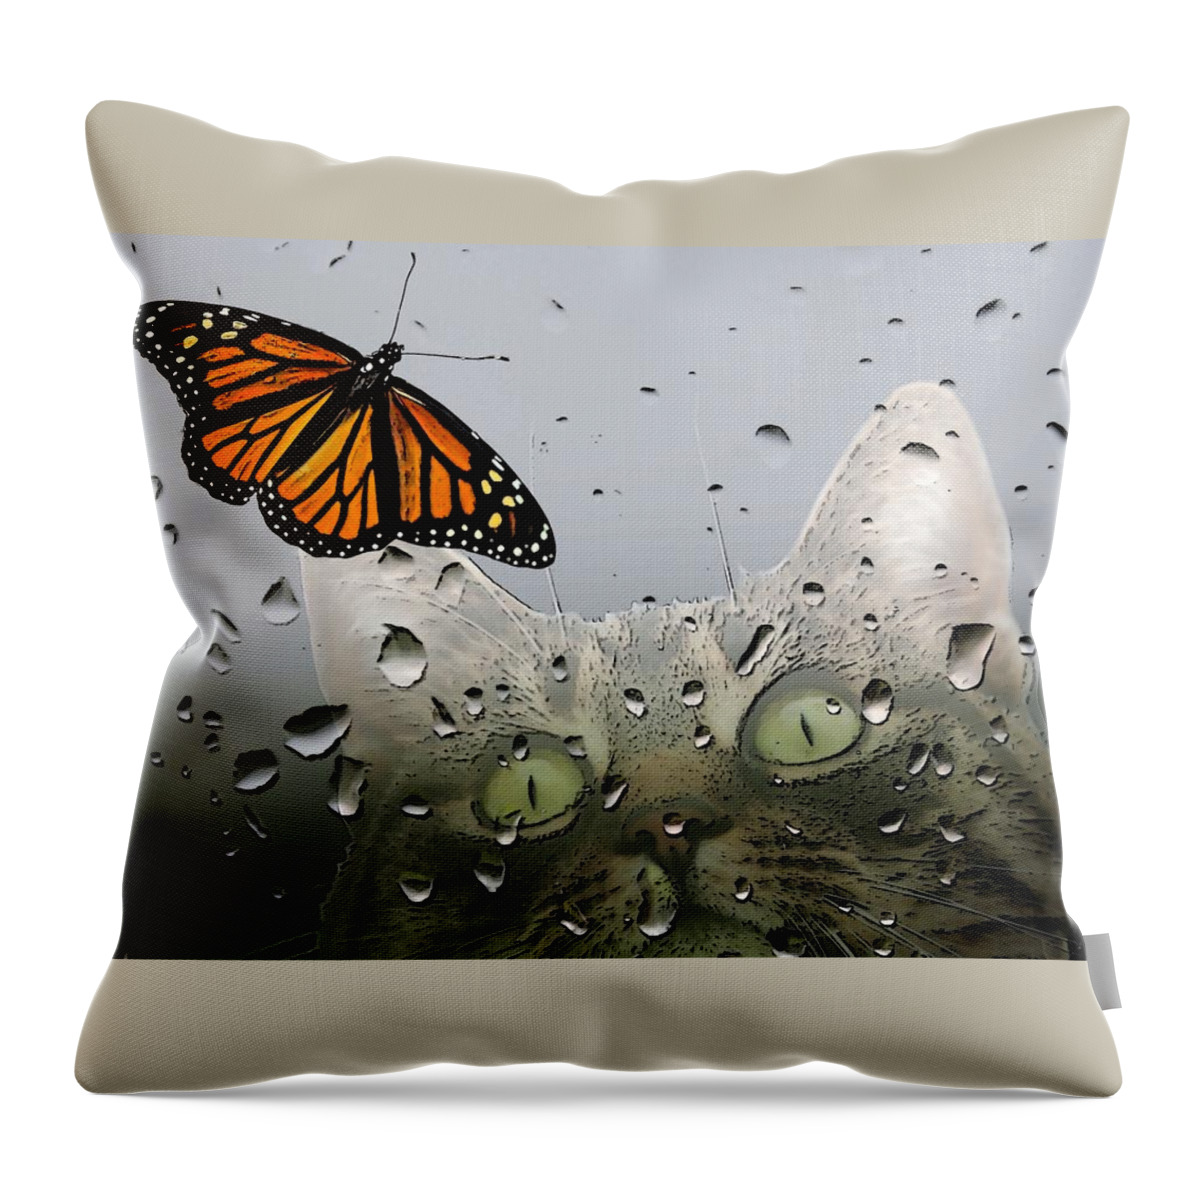 Monarch Butterfly Throw Pillow featuring the photograph Butterflies Are Free by I'ina Van Lawick